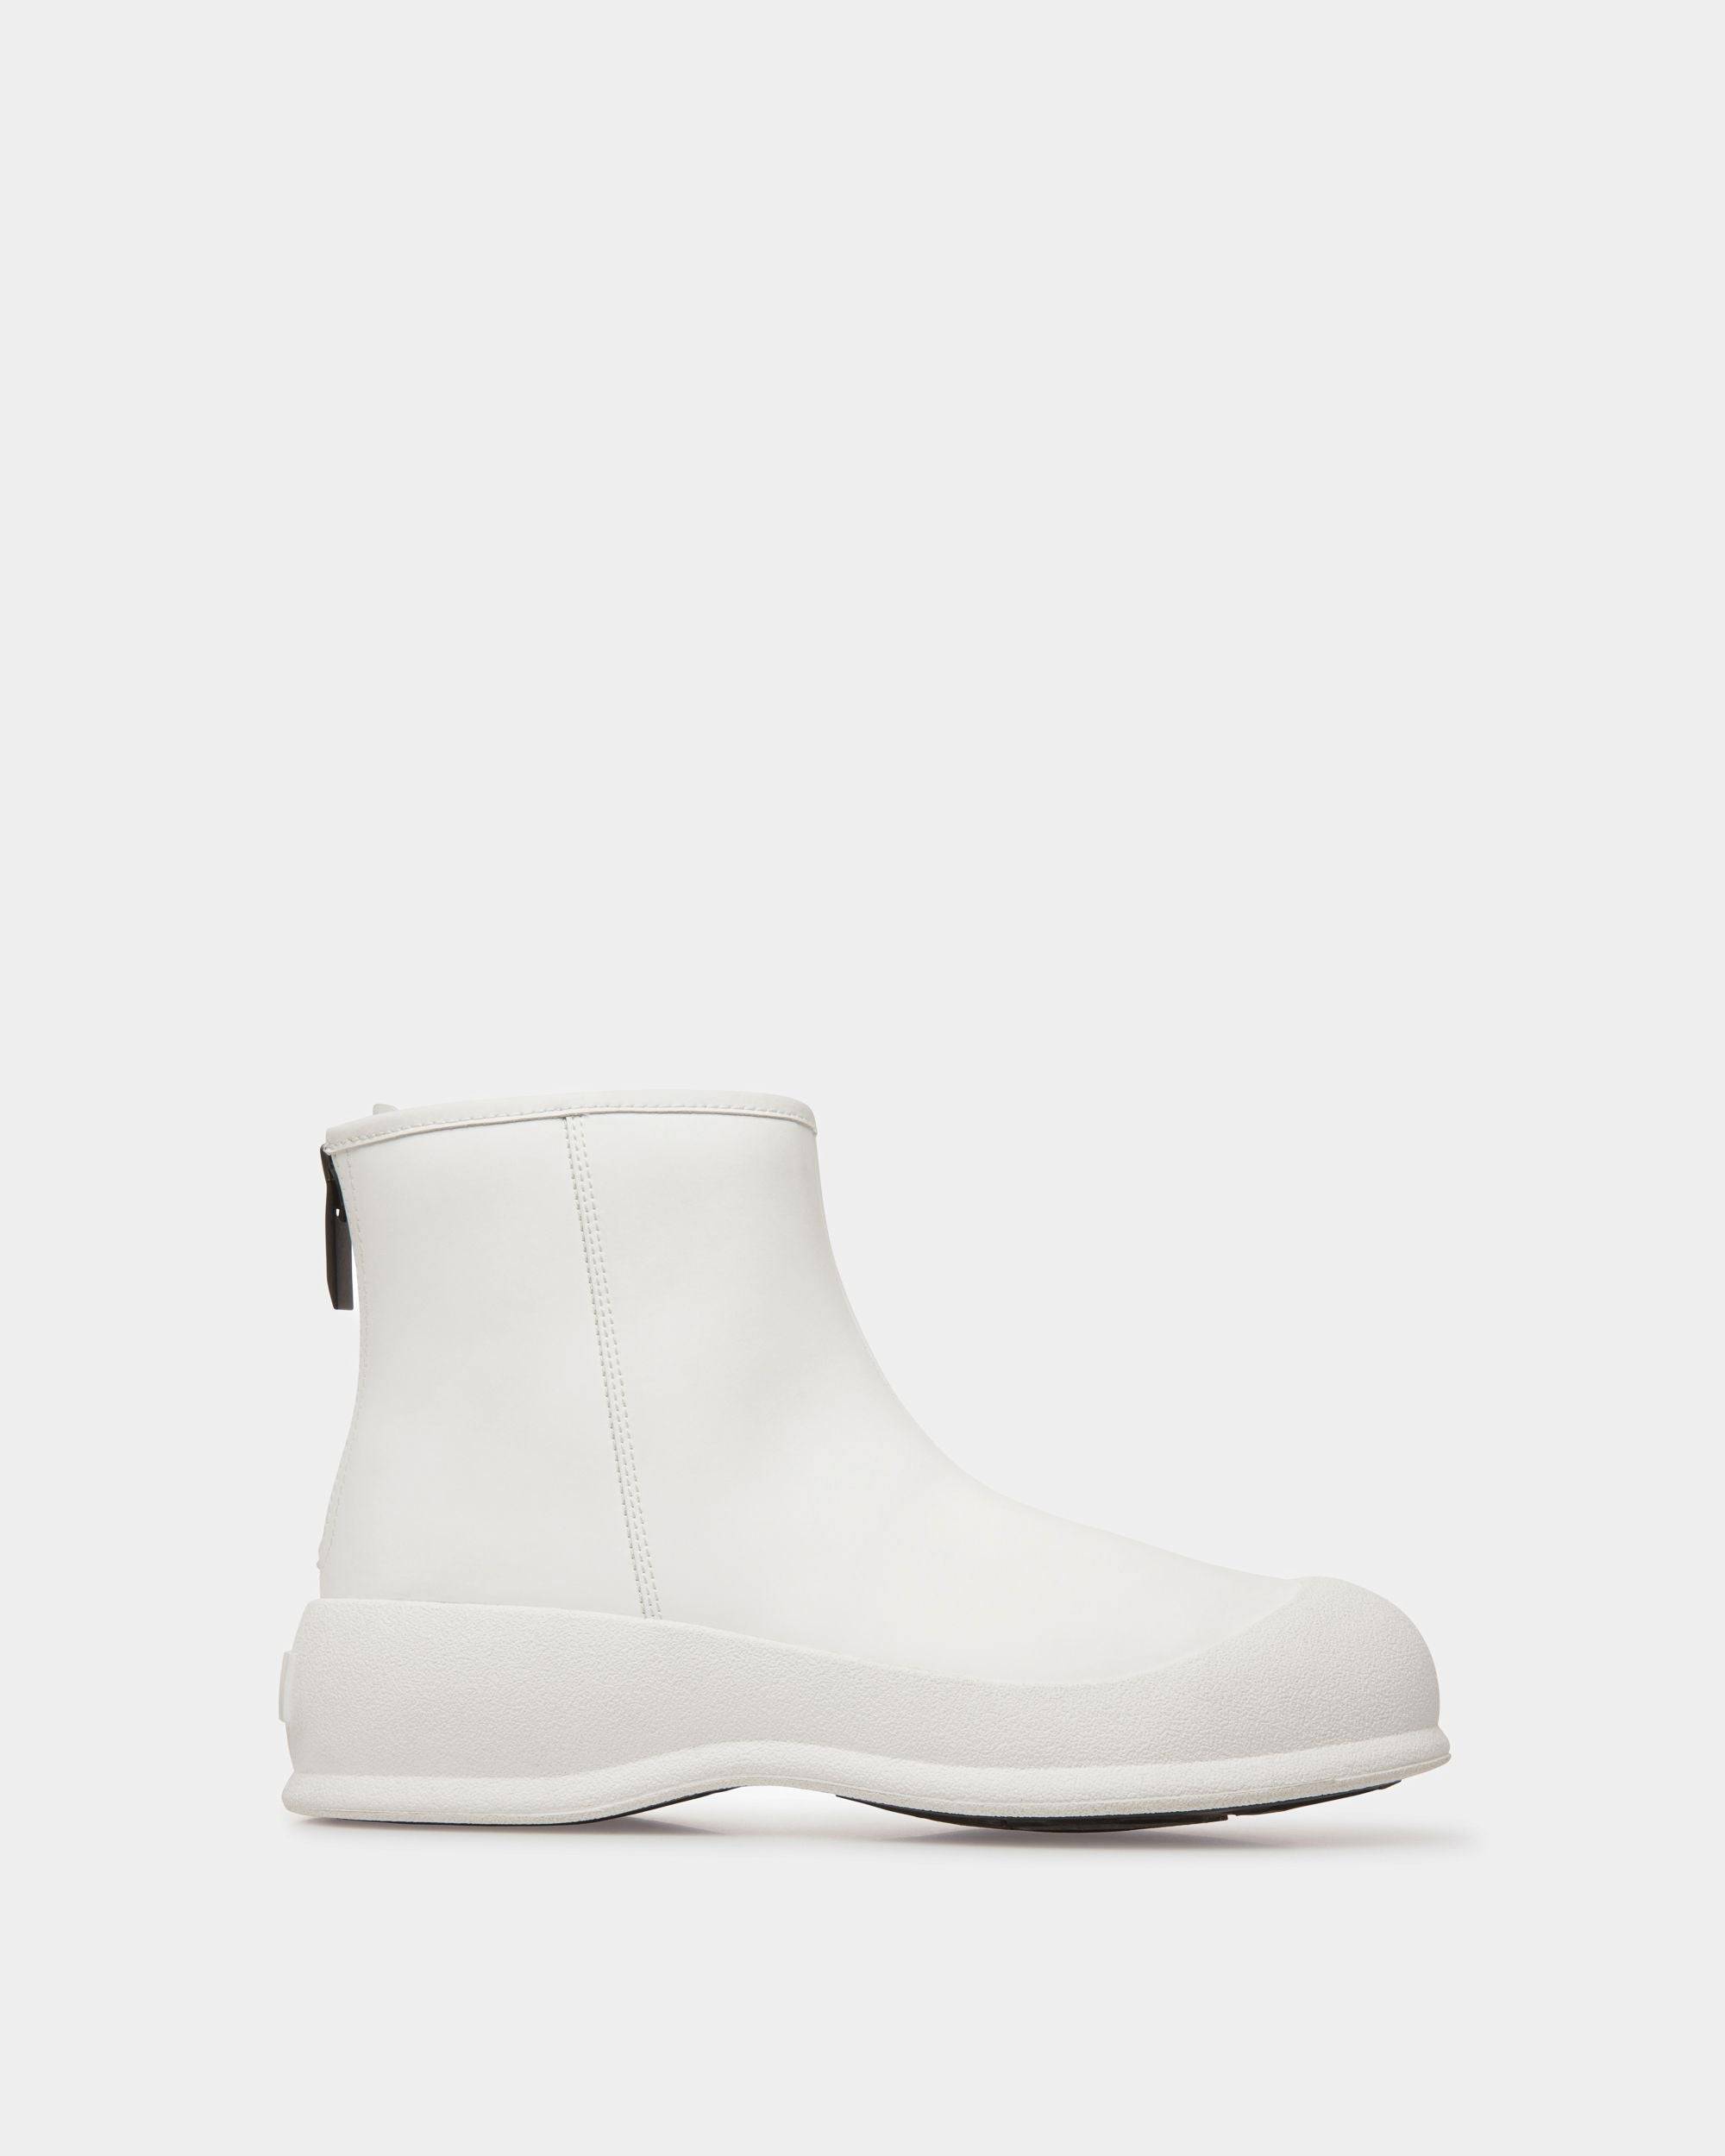 Carsey | Women's Booties | White Rubber-coated Leather | Bally | Still Life Side